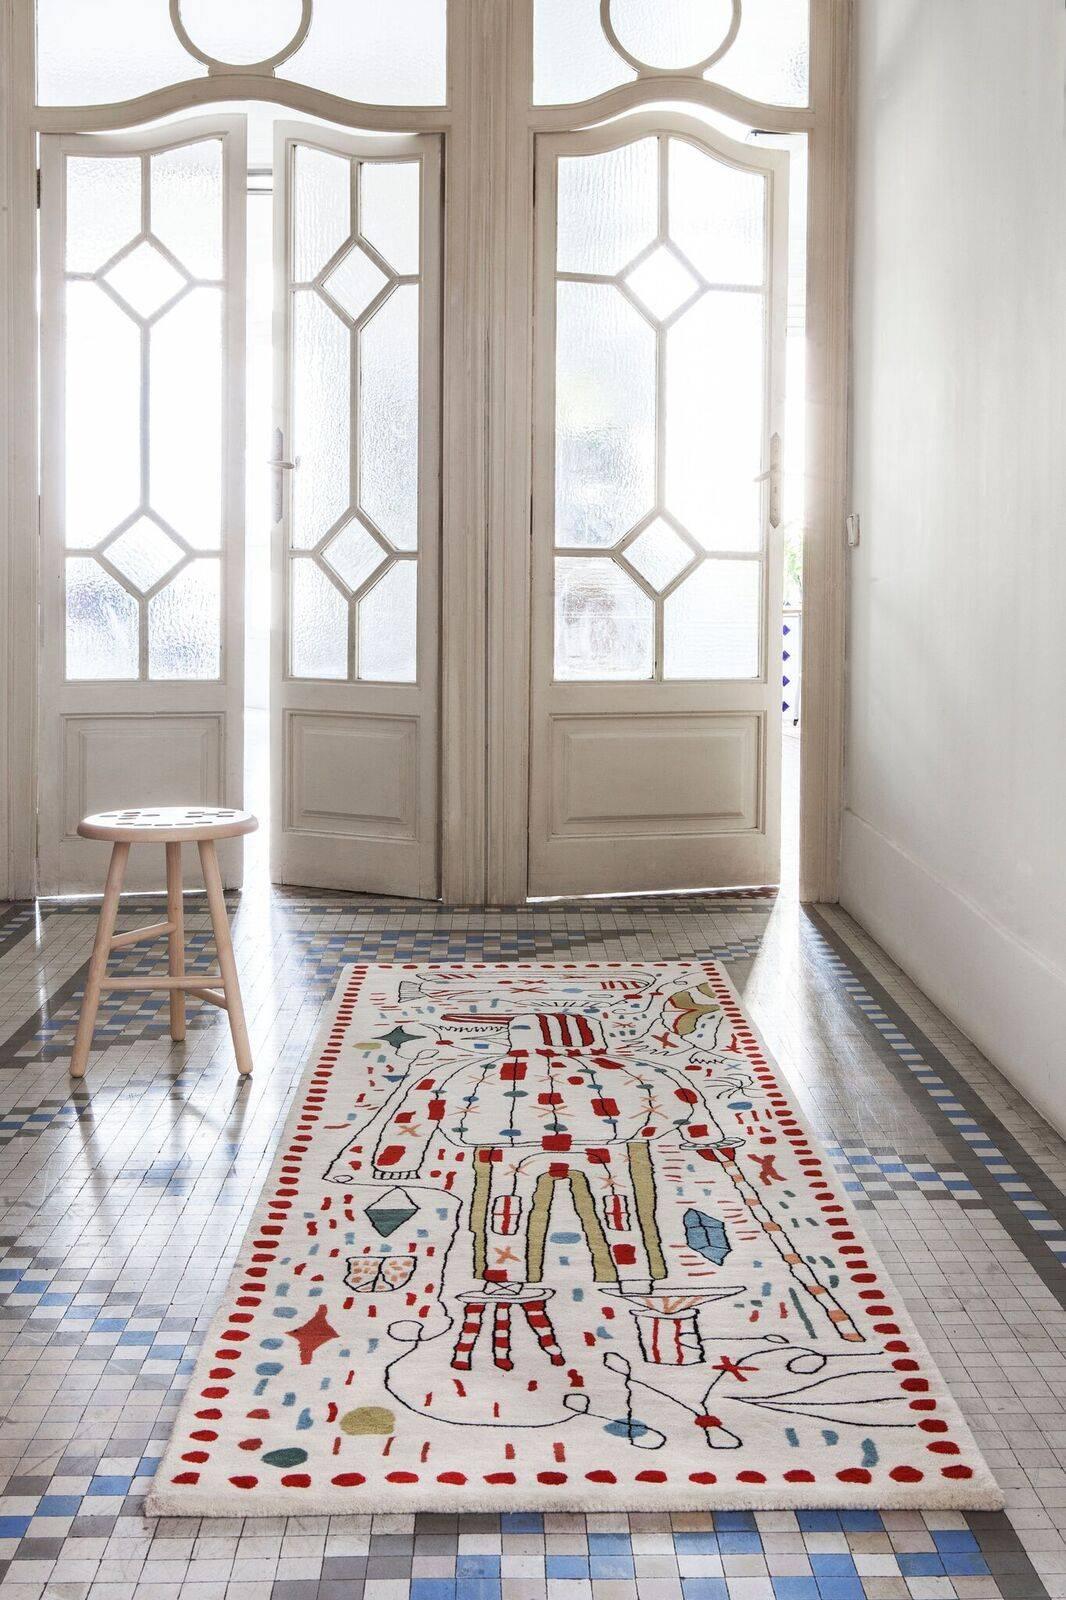 This is one of three wool rugs in Nanimarquina's Nani x Hayon collection designed by Jaime Hayon. Created with the hand tufting technique, a manually operated pistol injects pieces of wool, intuitive and fluid lines are achieved, as well as an